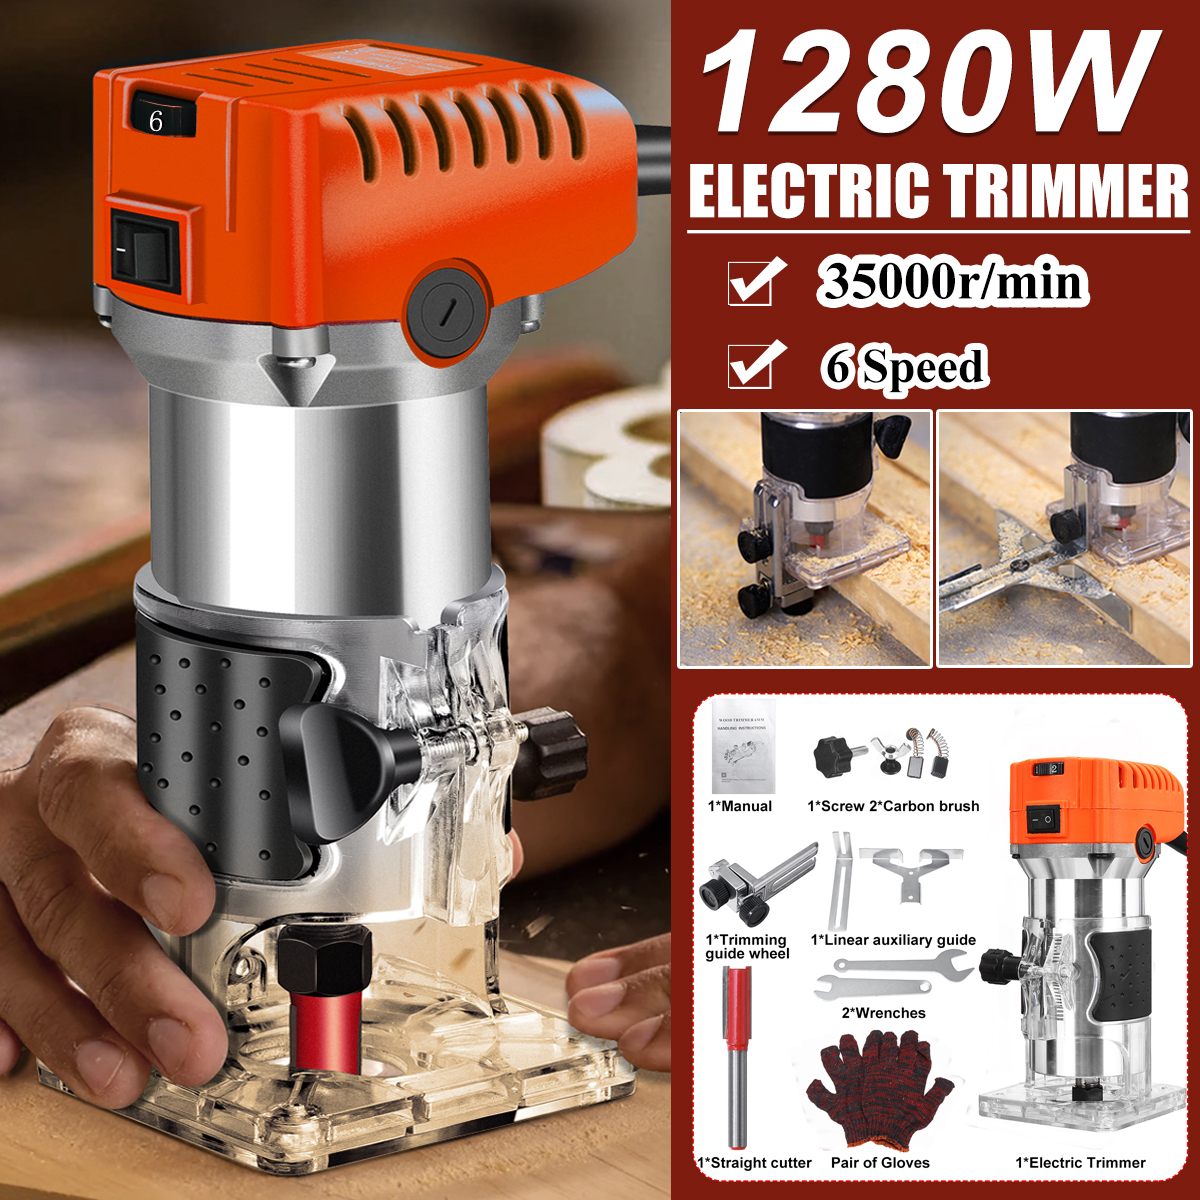 1280W-Wood-Palm-Router-Tool-Hand-Edge-Trimmer-WoodWorking-Joiner-Cutting-Palmming-Tool-6-Speeds-3500-1937521-1